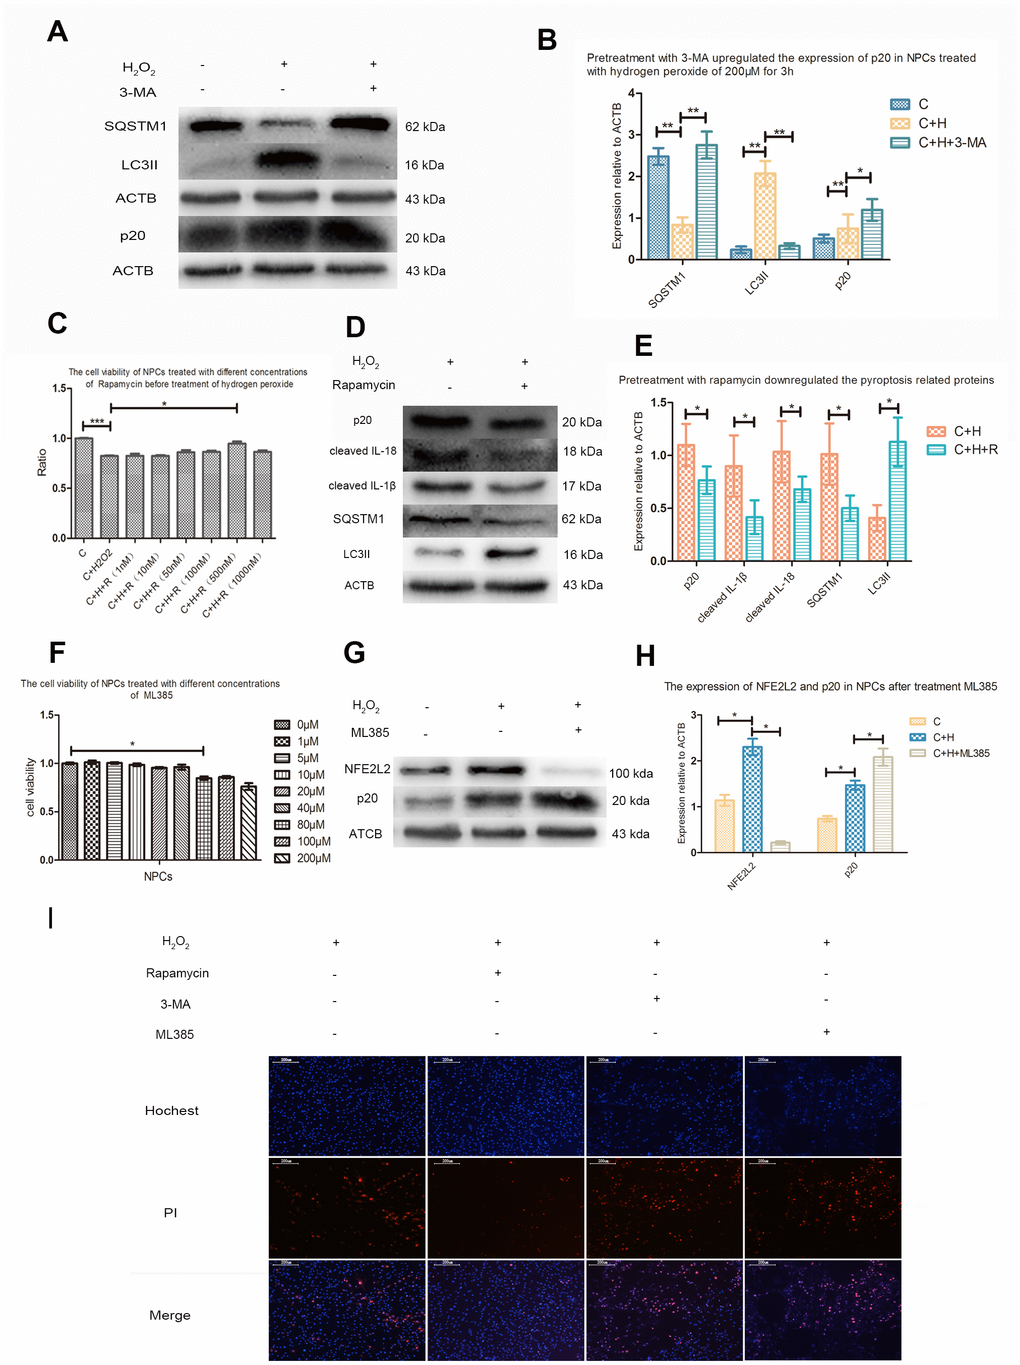 Autophagy and NFE2L2 both inhibited CASP1 cleavage. (A) The western blot detecting the expression of SQSTM1, MAP1LC3B and p20 in the nucleus pulposus cells with or without pretreatment with 3-MA before treatment with hydrogen peroxide. (B) The comparison of the data measured in the Figure A. (C) The CCK-8 test revealing the viability of the cells pretreated with different concentration of rapamycin before treatment with hydrogen peroxide (200μM, 3h). (D) The western blot detecting the expression of SQSTM1, MAP1LC3B and p20 in the nucleus pulposus cells with or without pretreatment with rapamycin before treatment with hydrogen peroxide. (E) The comparison of the data measured in the Figure D. (F) The CCK-8 test detecting the effect of ML385 of different concentrations on viability of nucleus pulposus cells. (G) The western blot detecting the expression of NFE2L2 and p20 in the NPCs with or without pretreatment with ML385 before treatment with hydrogen peroxide. (H) The comparison of the data measured in the Figure G. (I) The hochest33342/PI double staining showed the PI positive cells were decreased when nucleus pulposus cells were pretreated with rapamycin and increased when those were pretreated with 3-MA or ML385. (magnification: ×10, scale bar = 200μm) The data were represented as mean ± SEM. *P 